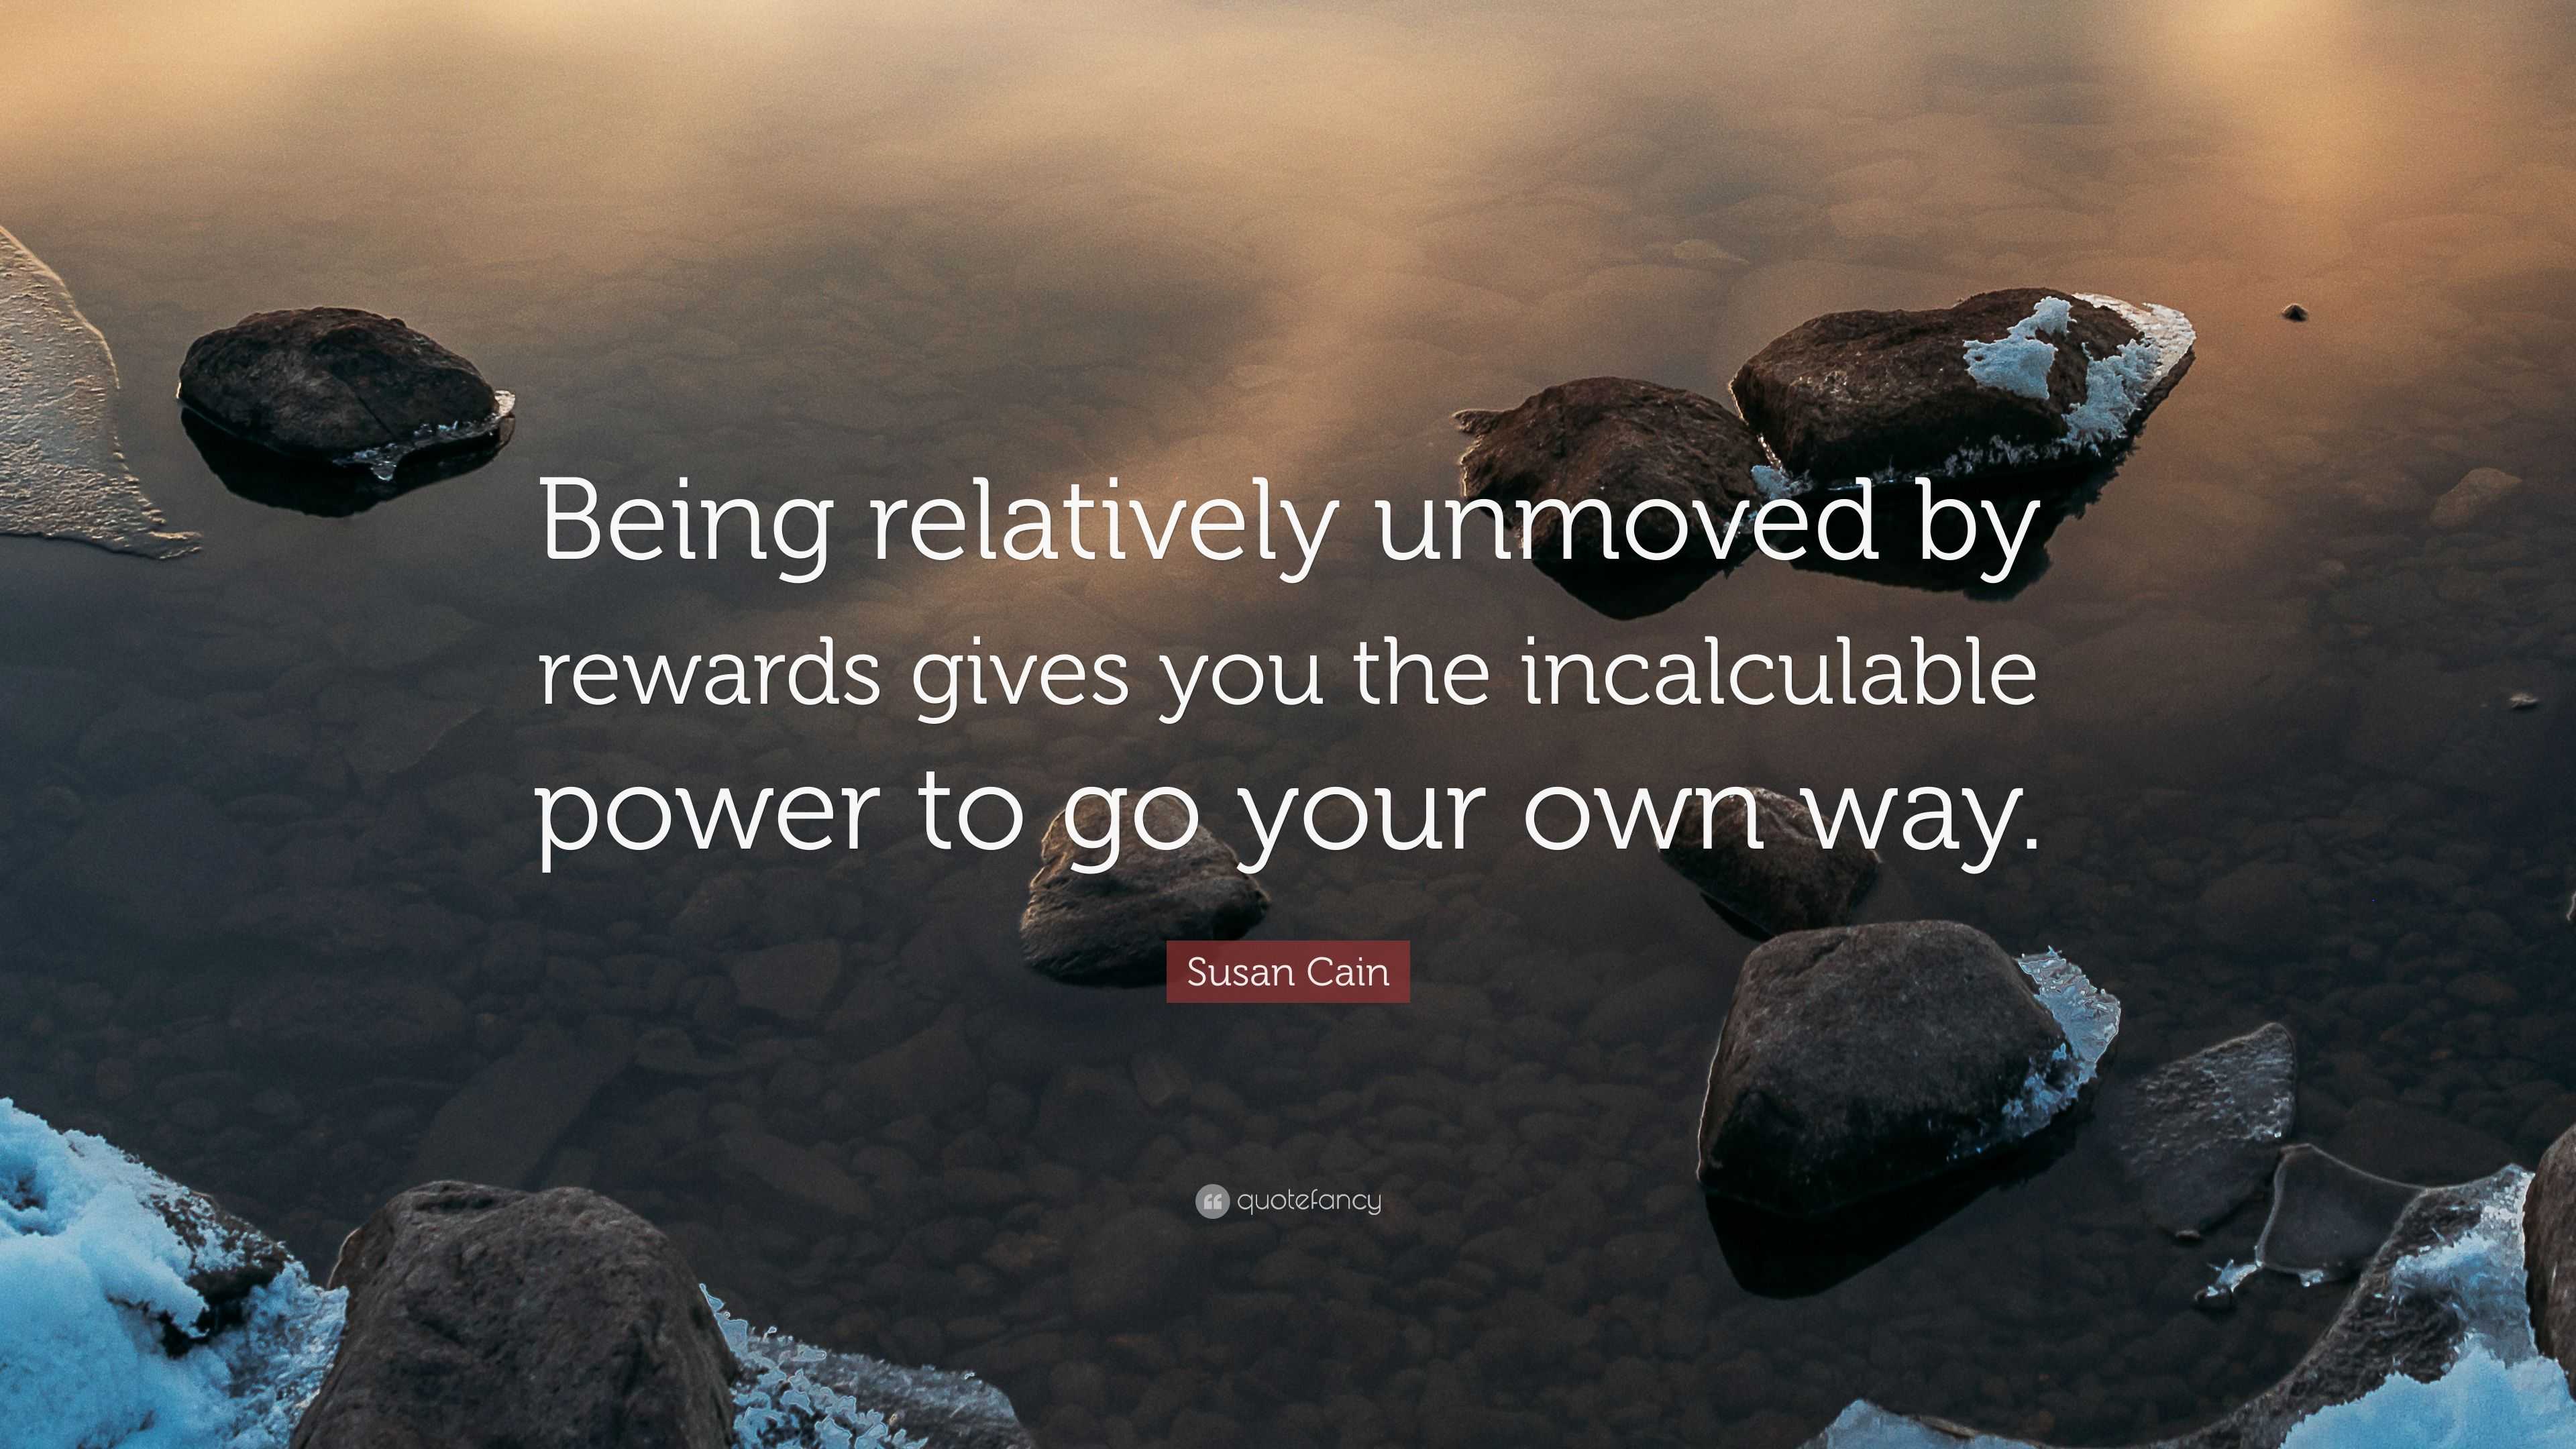 Susan Cain Quote: “Being relatively unmoved by rewards gives you the  incalculable power to go your